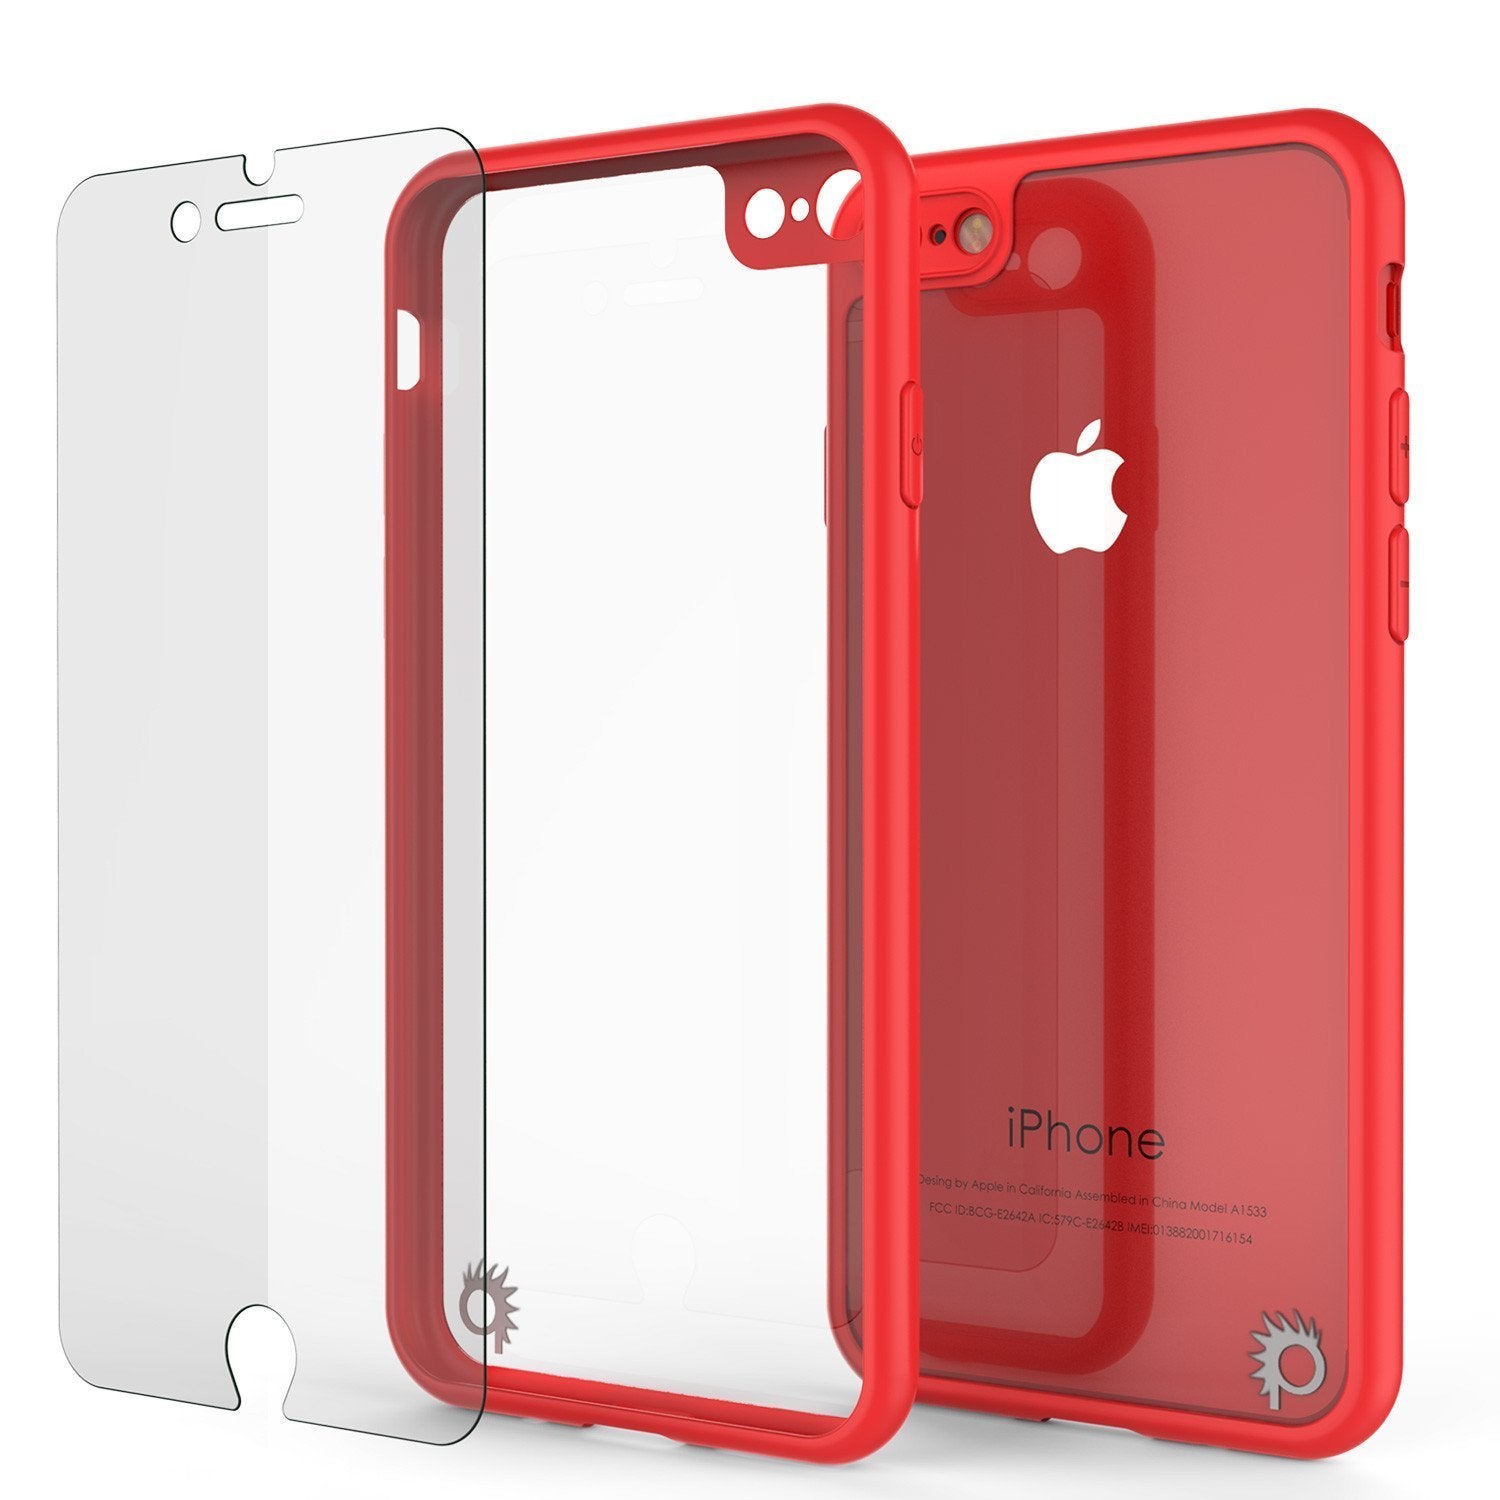 iPhone SE (4.7") Case [MASK Series] [RED] Full Body Hybrid Dual Layer TPU Cover W/ protective Tempered Glass Screen Protector